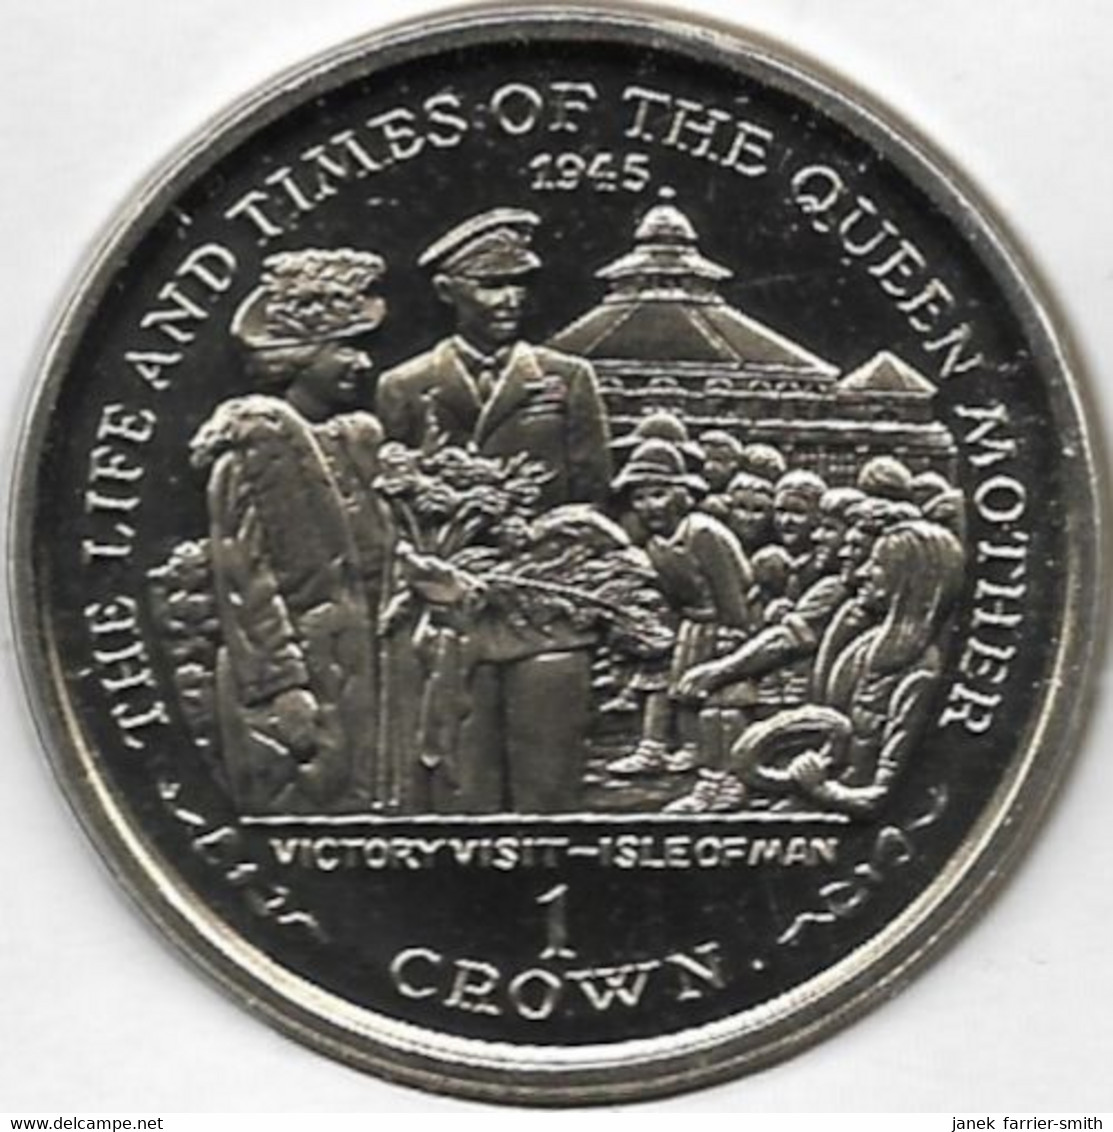 2000 Isle Of Man 1 Crown The Life & Times Of The Queen Mother 1945 Coin Cover - Isle Of Man